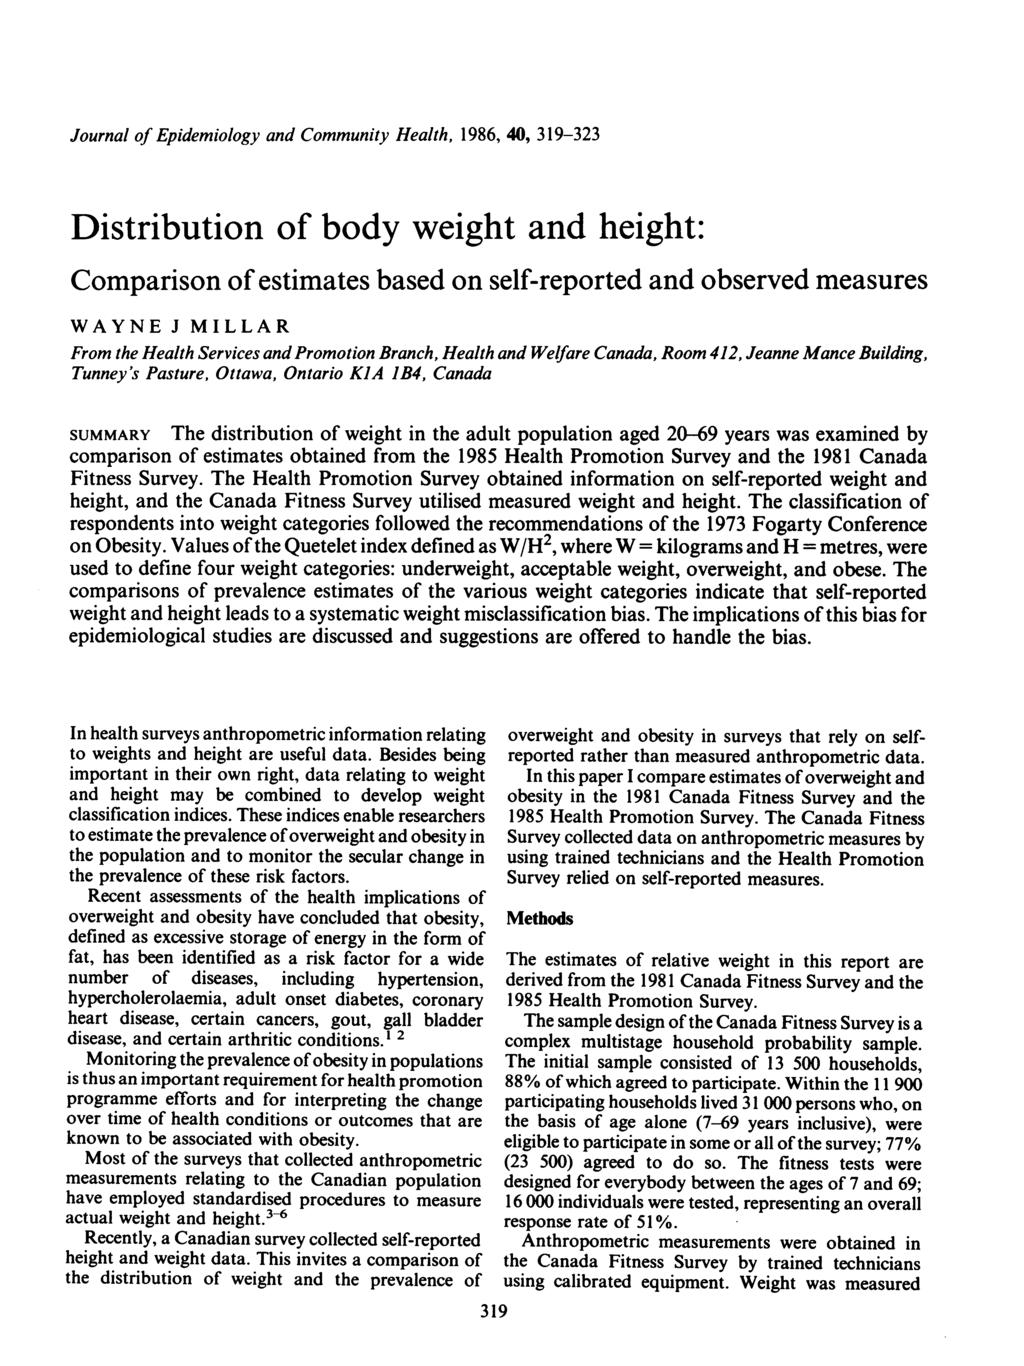 Journal of Epidemiology and Community Health, 1986, 40, 319-323 Distribution of body weight and height: Comparison of estimates based on self-reported and observed measures WAYNE J MILLAR From the